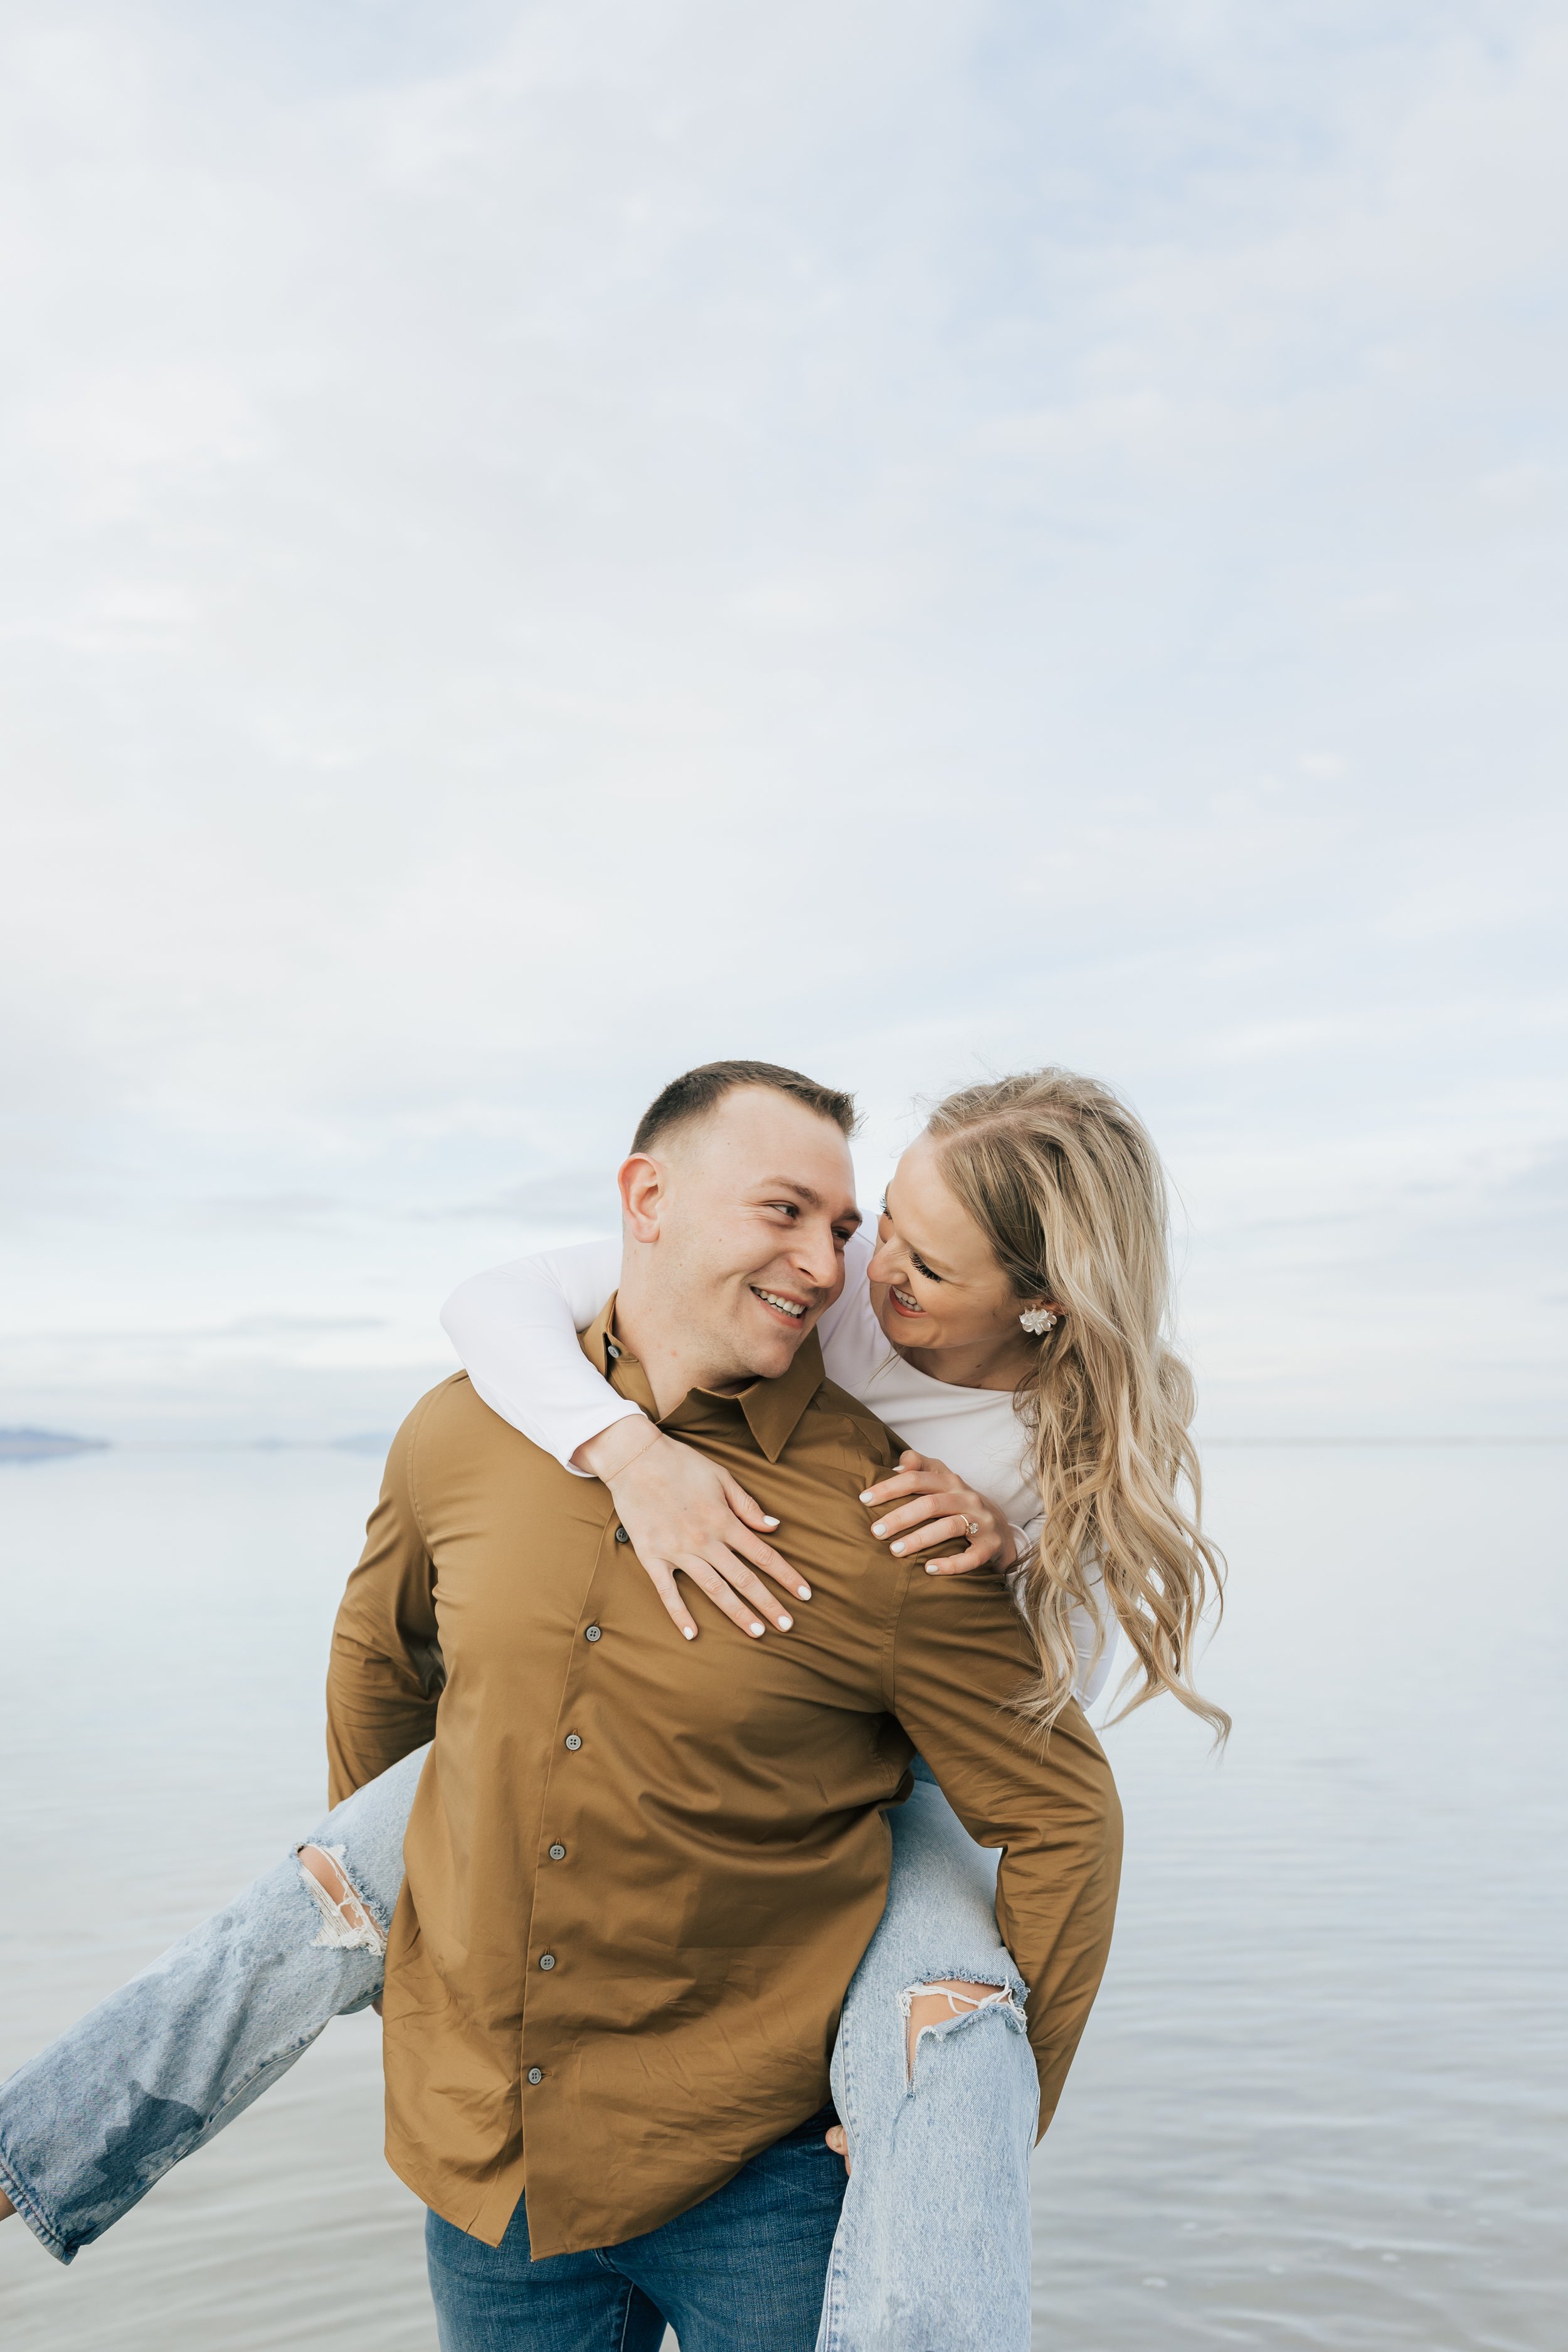  Engagement photography was done by Emily Jenkins Photography with a light and airy editing style. light and airy natural editing  #EmilyJenkinsPhotography #EmilyJenkinsEngagements #BonnevilleSaltFlats #SaltFlatEngagements #UtahEngagements #LakeEngag